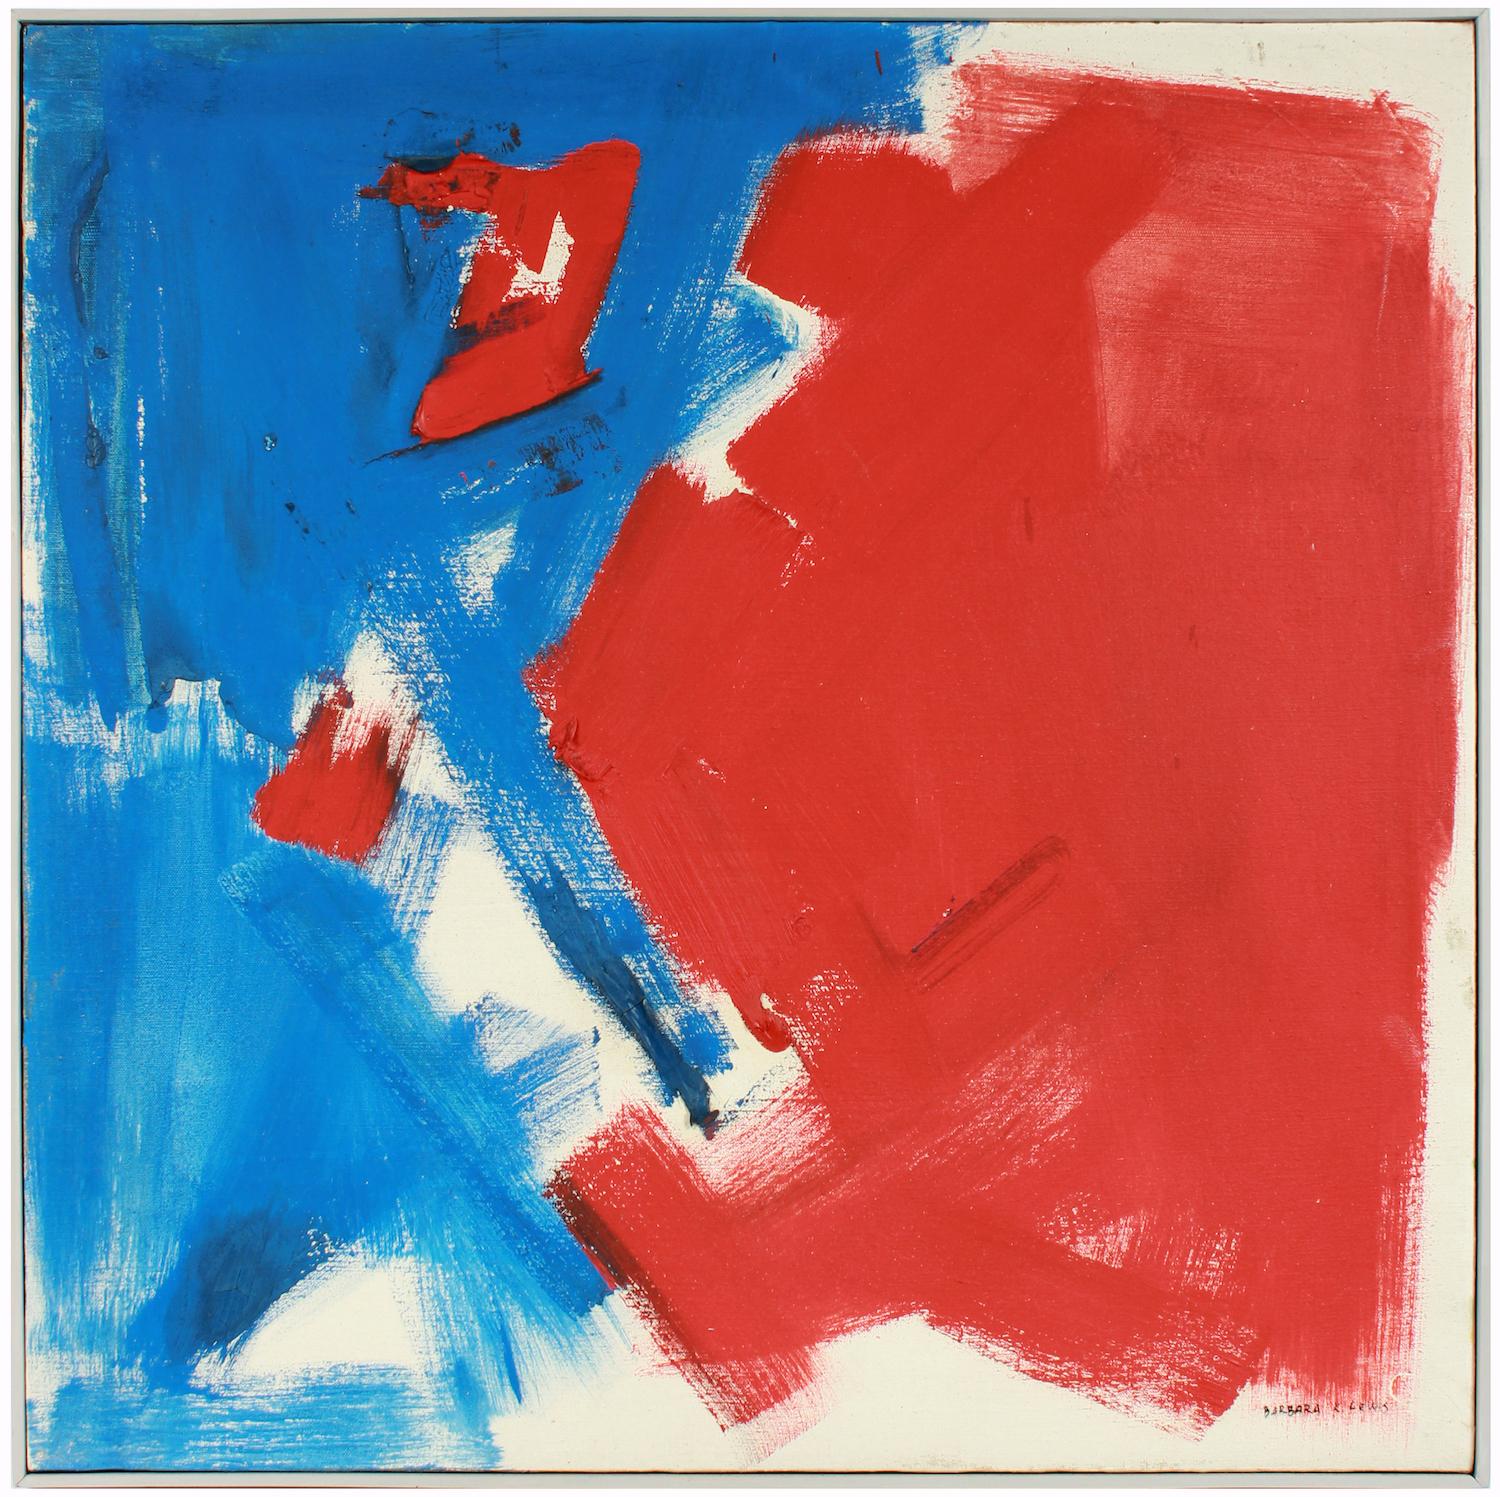 Barbara Lewis Abstract Painting - Large Abstract Expressionist Oil Painting in Red and Blue, Mid 20th Century